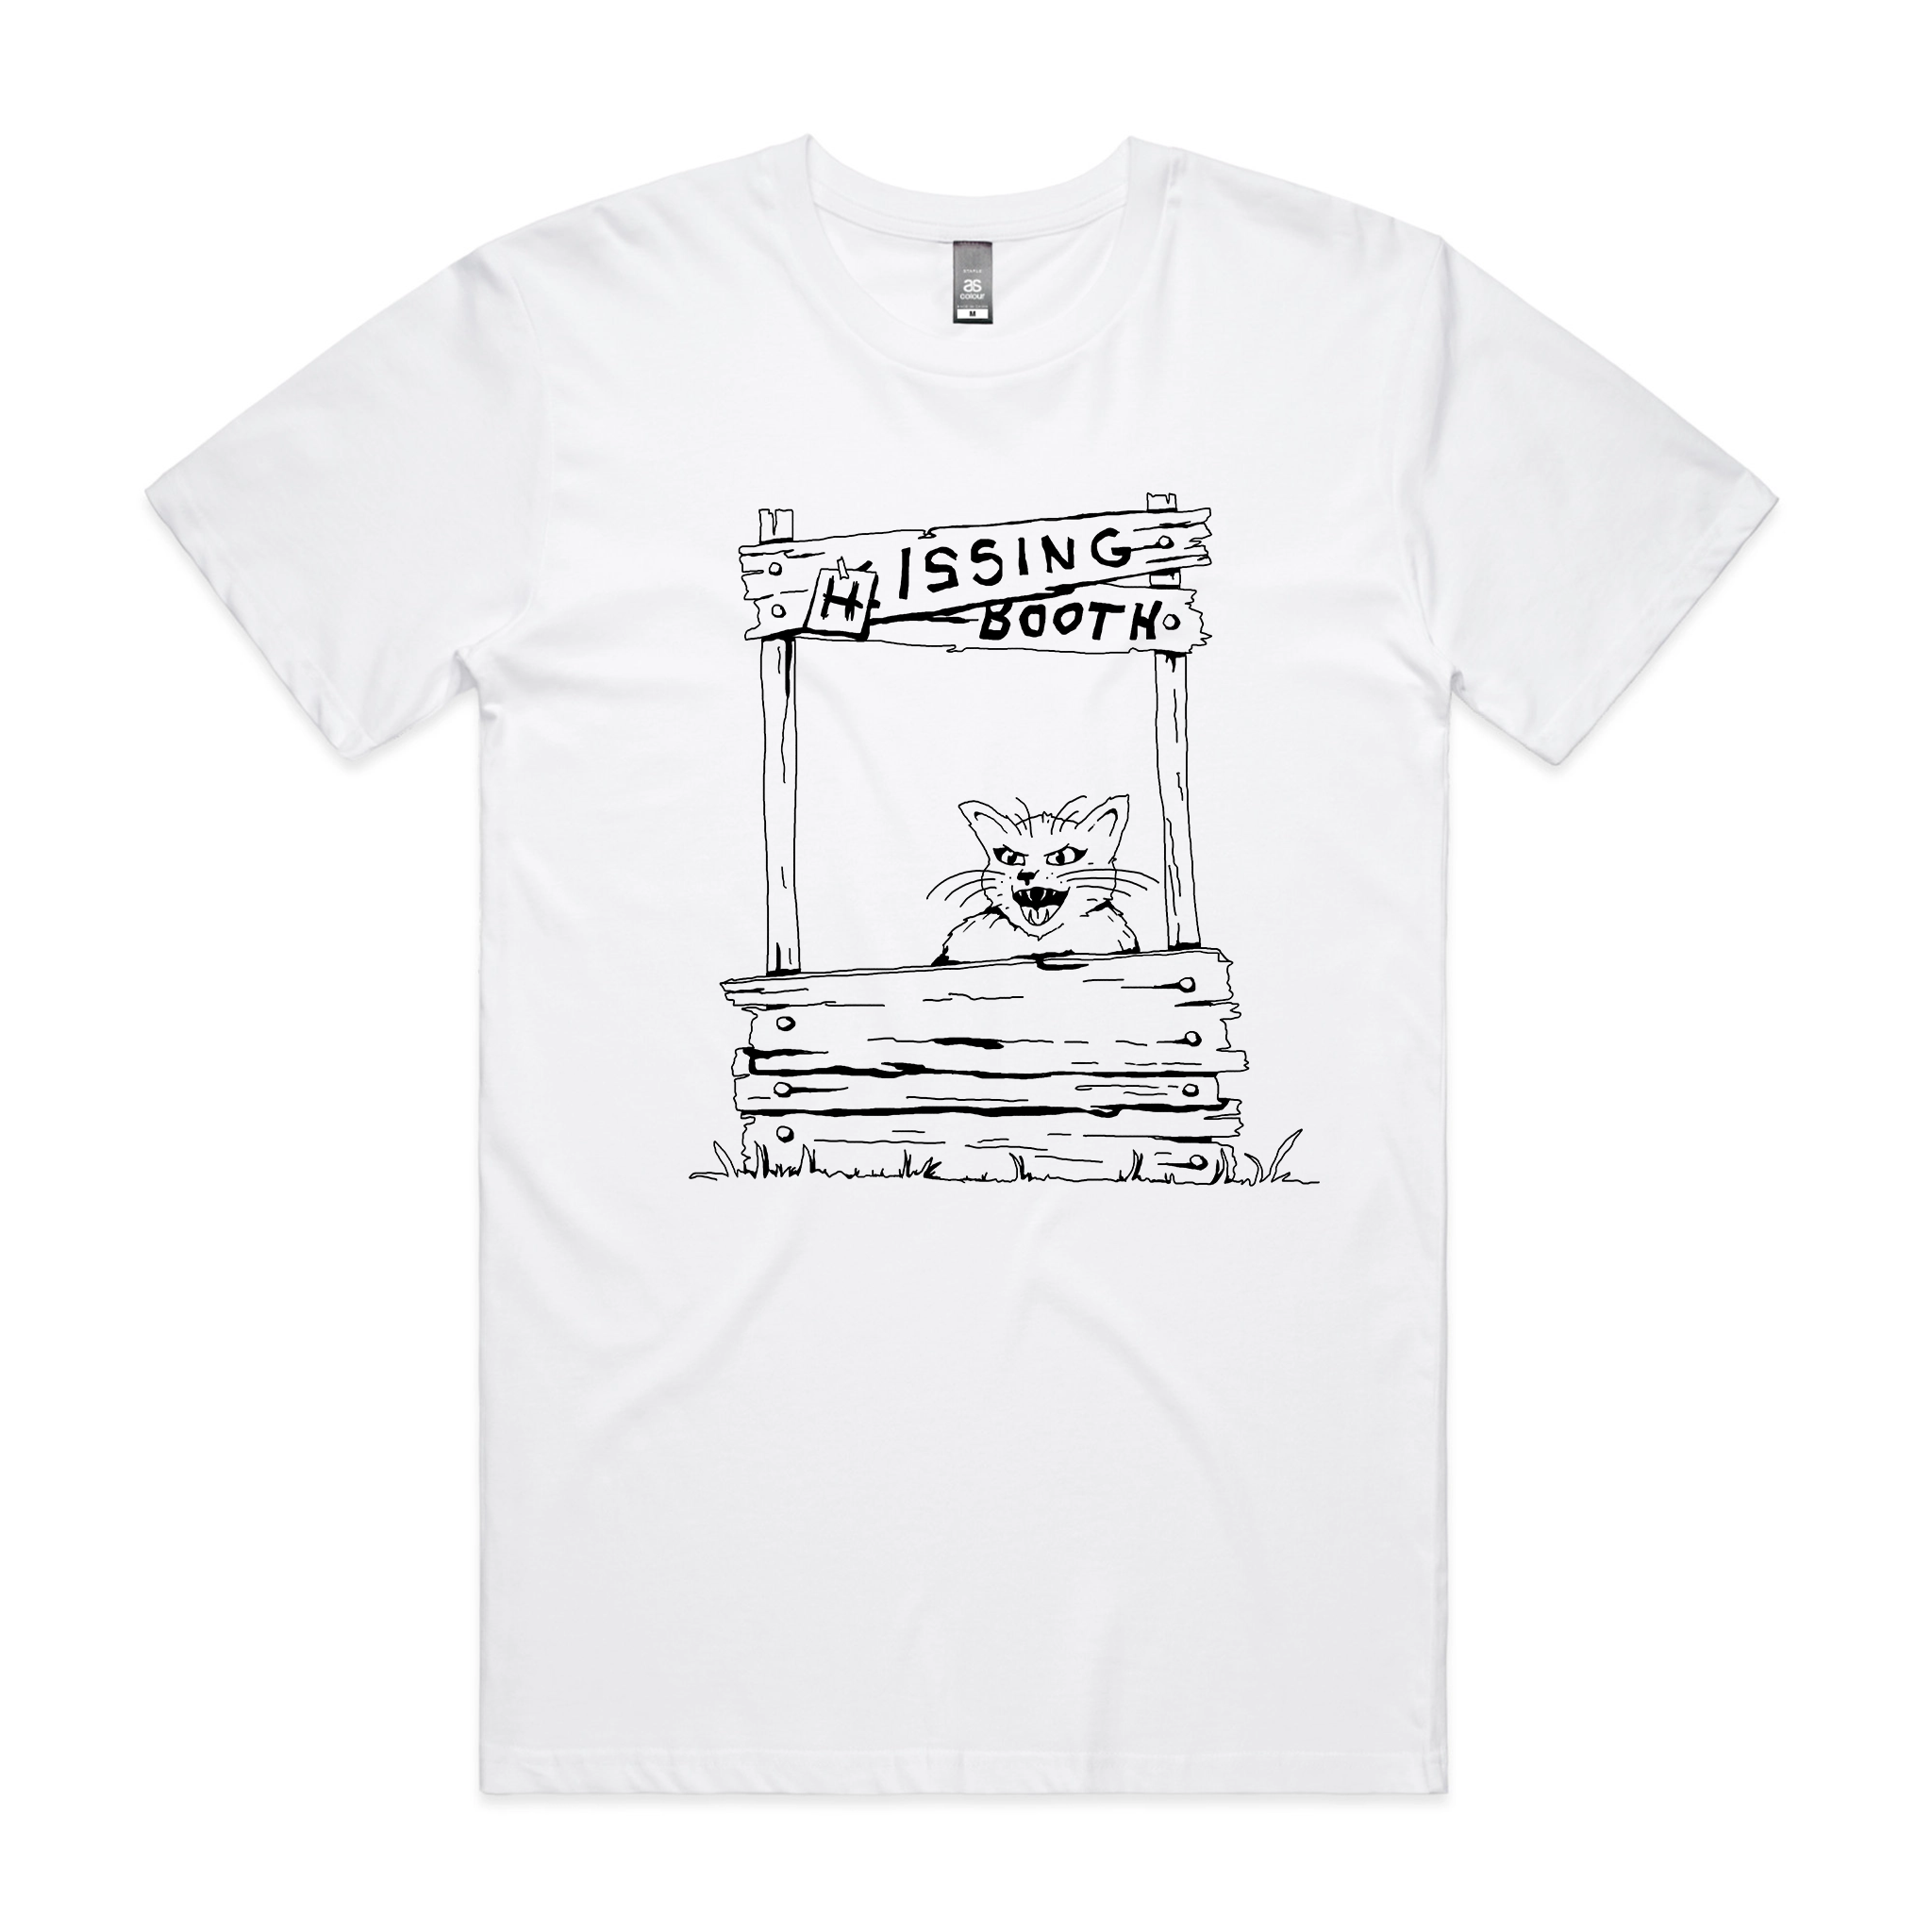 Hissing Booth Tee